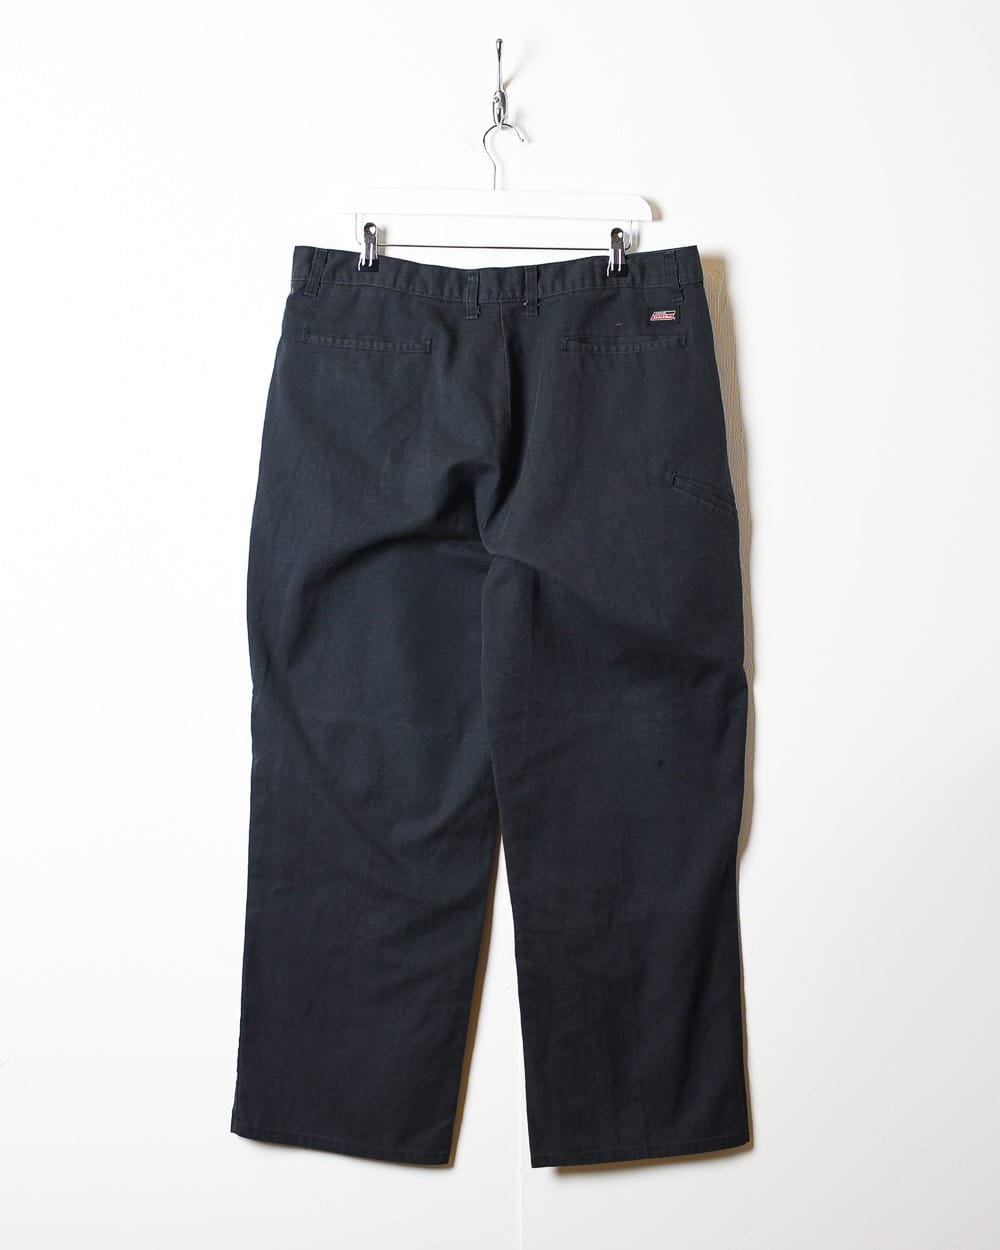 Black Dickies Relaxed Fit Double Knee Trousers - W38 L29